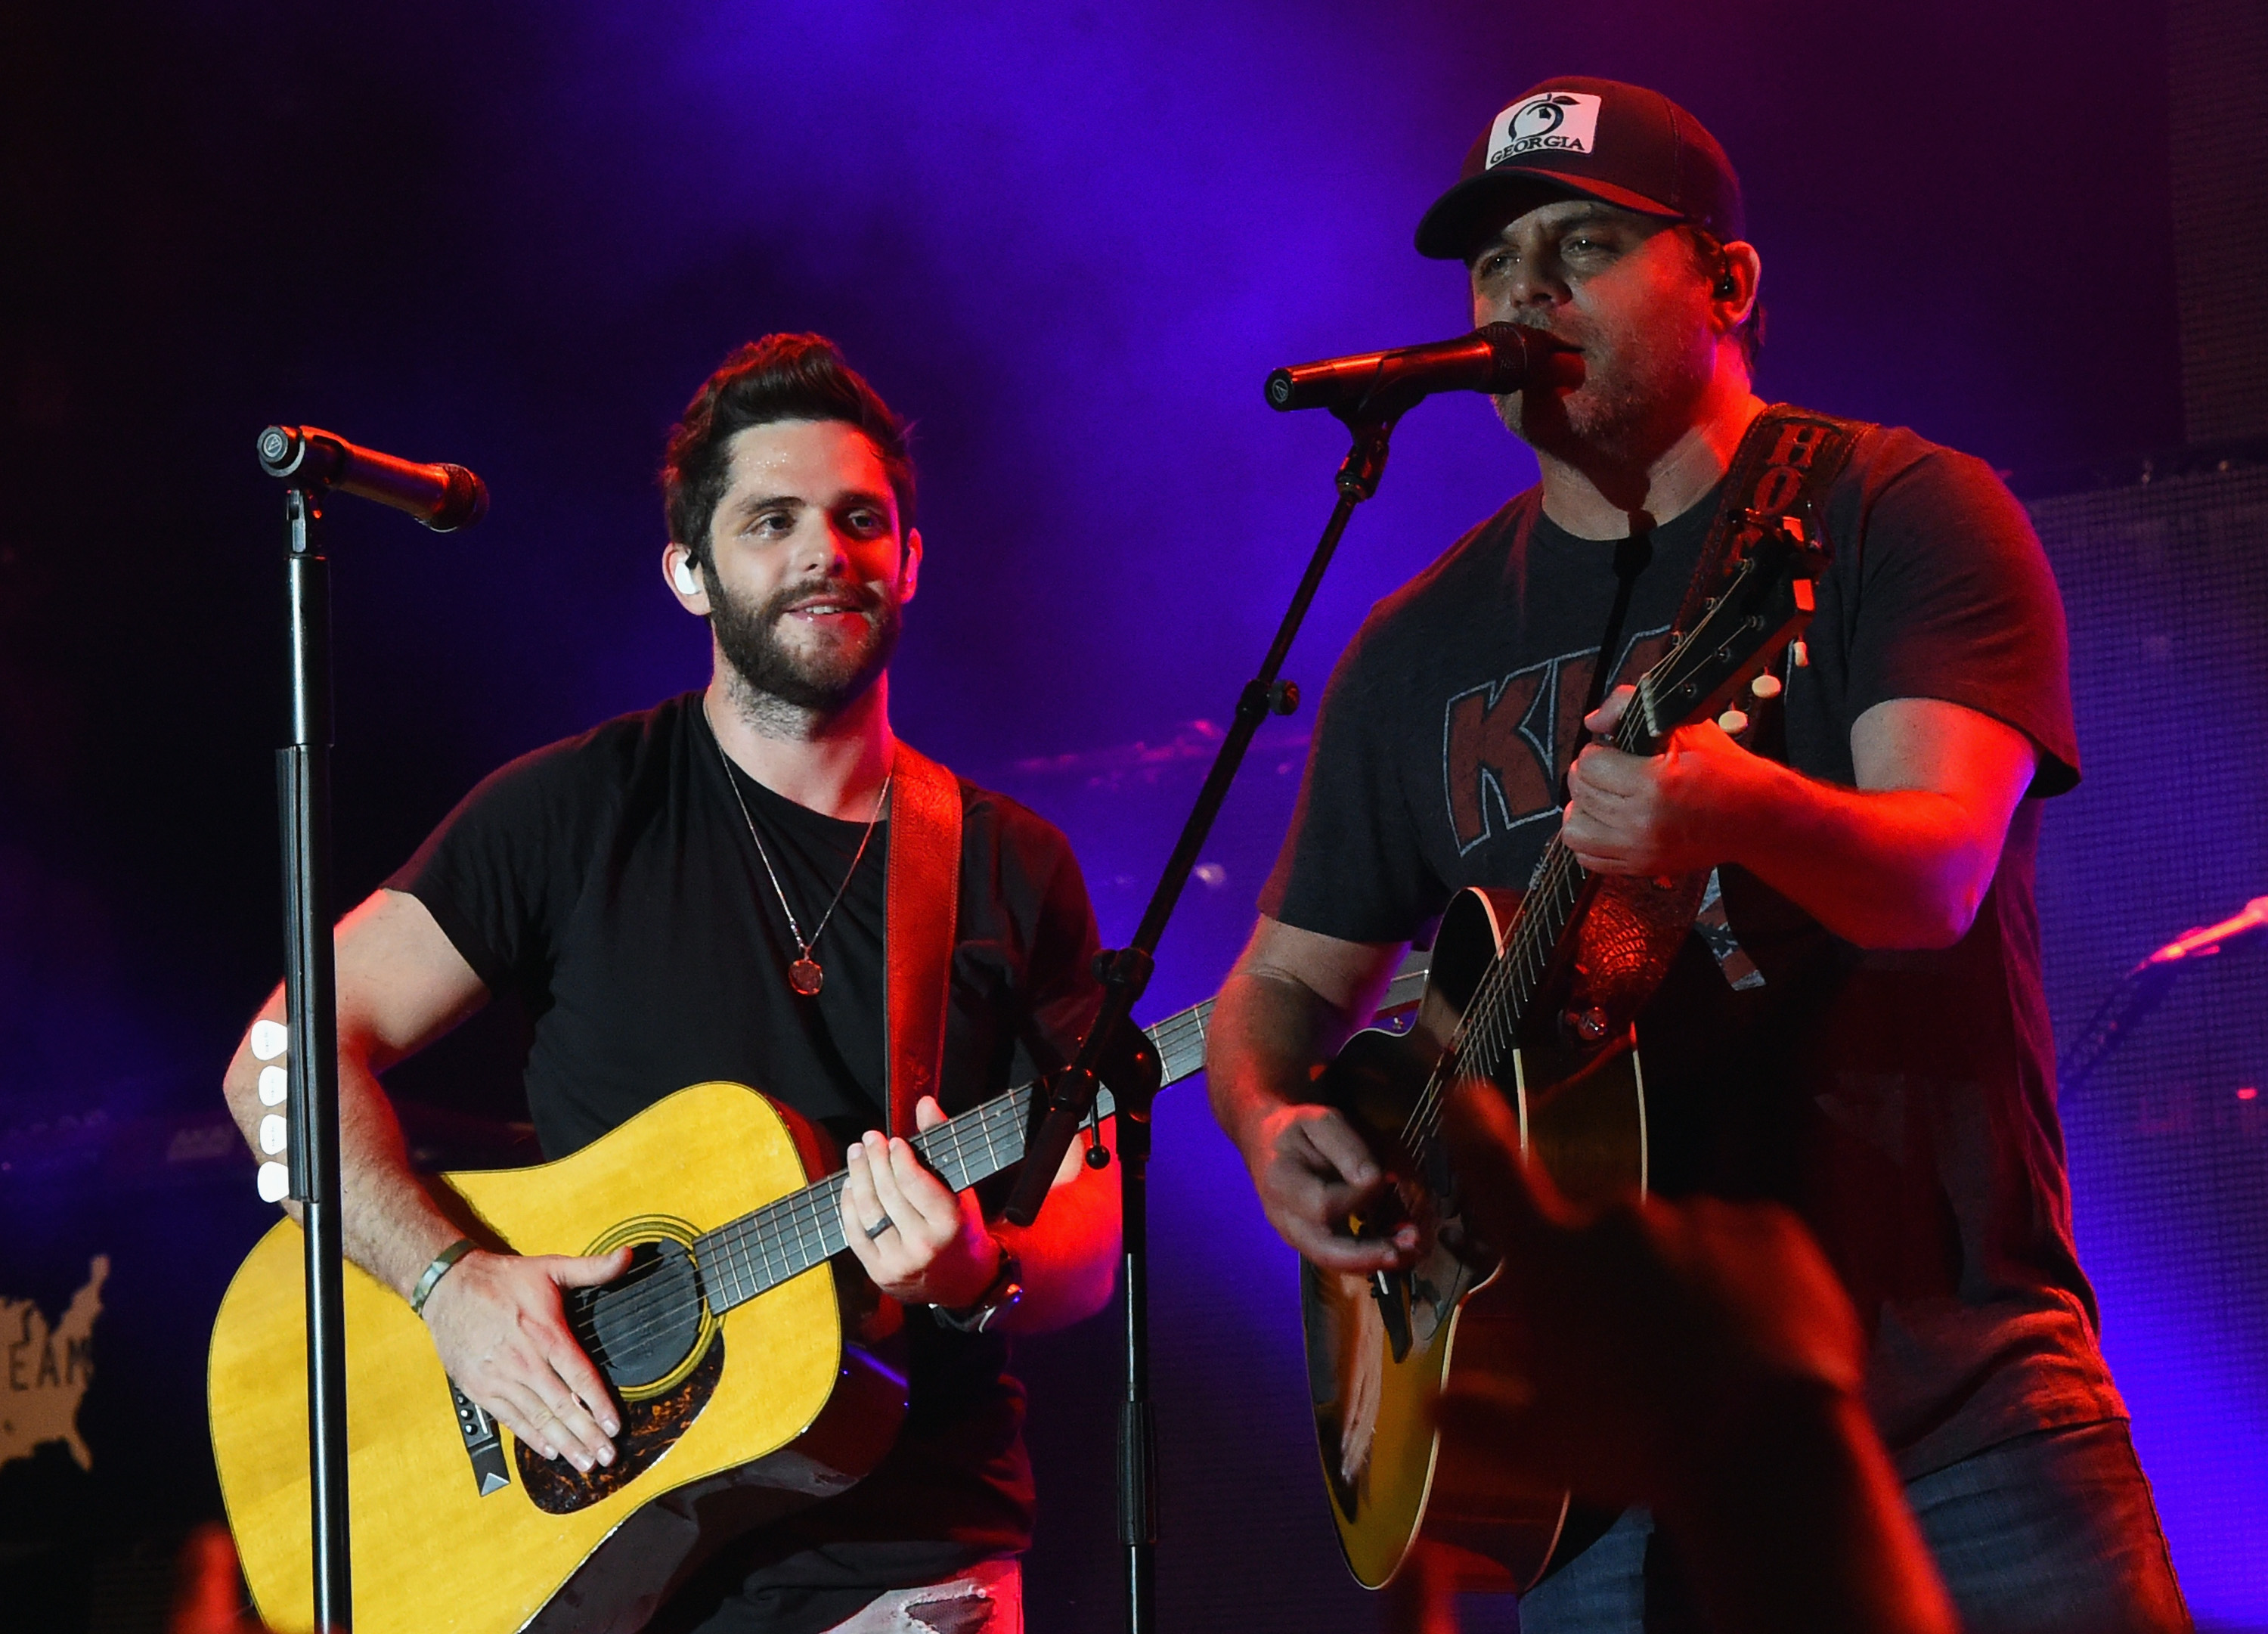 Thomas Rhett is joined on stage by his dad, Rhett Akins, during Pepsi's Rock The South Festival - Day 1 at Heritage Park on June 3, 2016, in Cullman, Alabama | Source: Getty Images